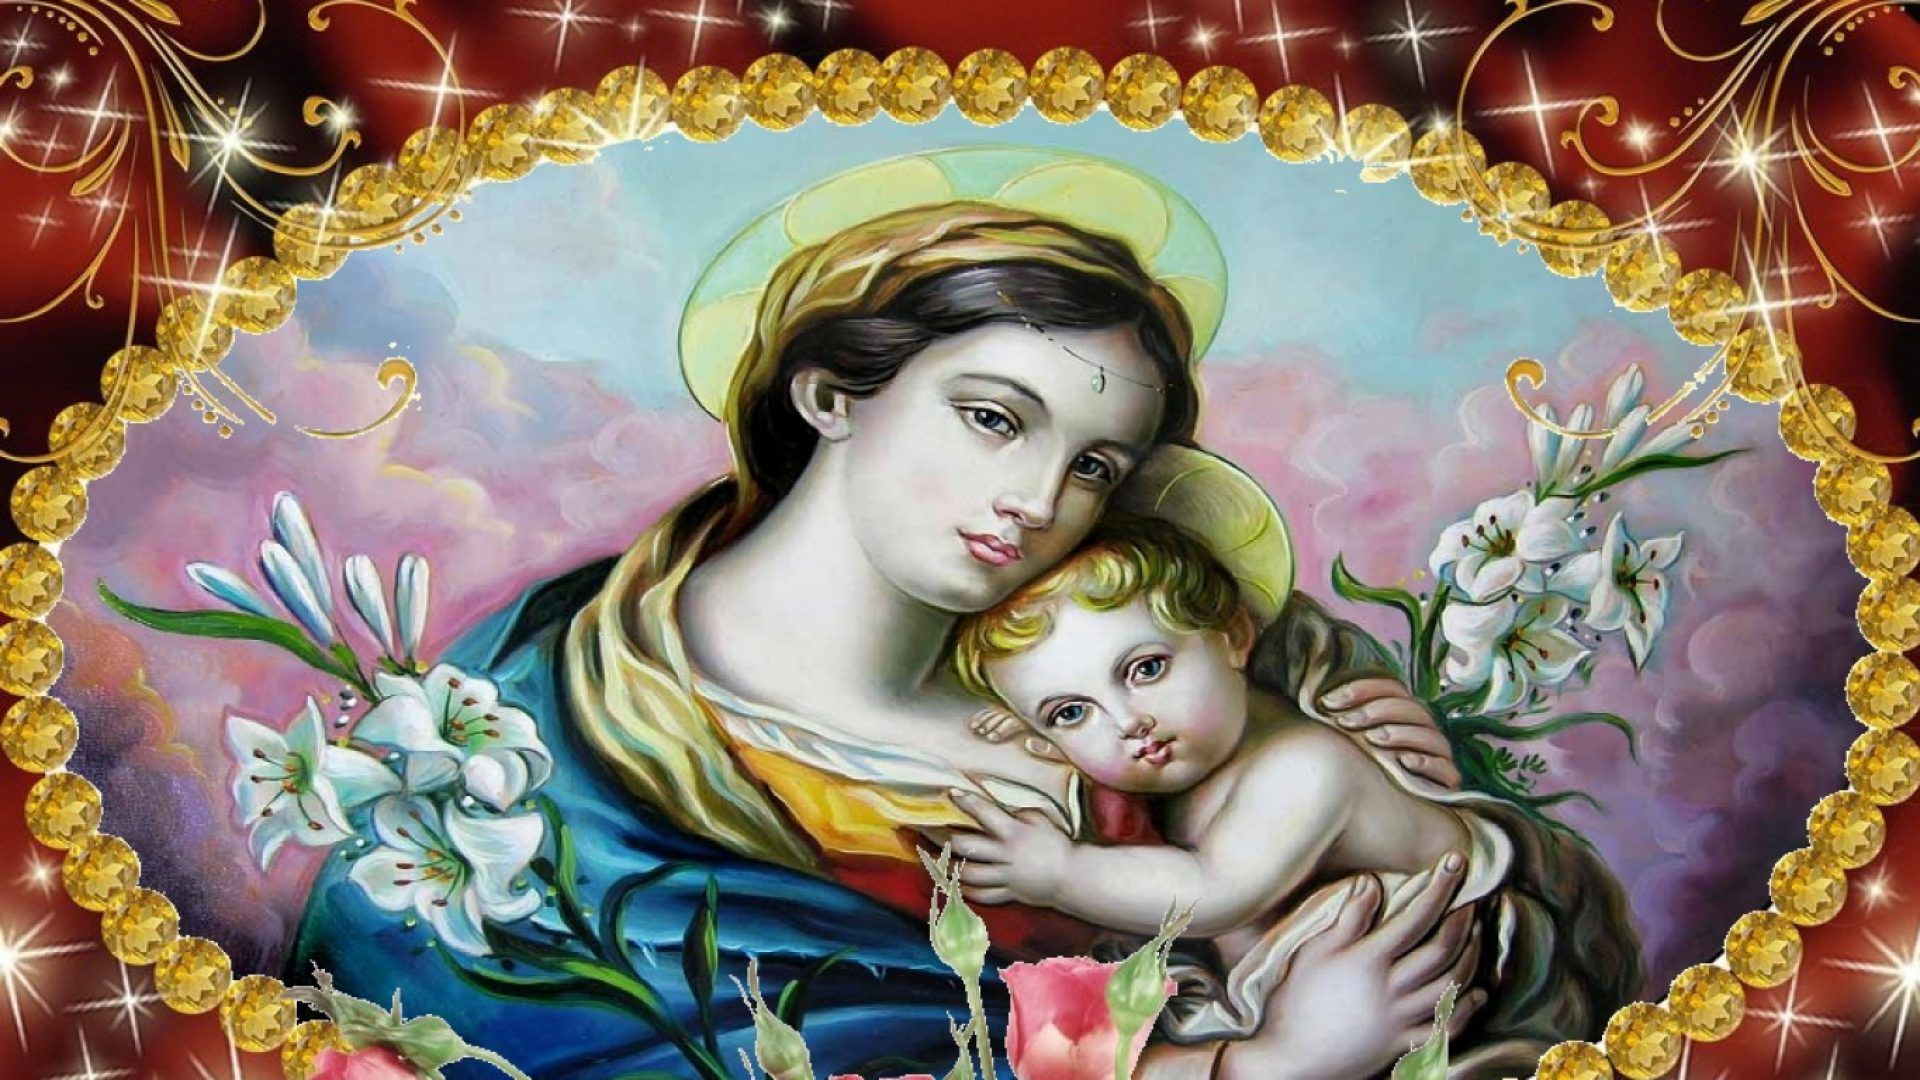 Beautiful 3D HD Image Of Mother Mary And Baby Jesus. Christian